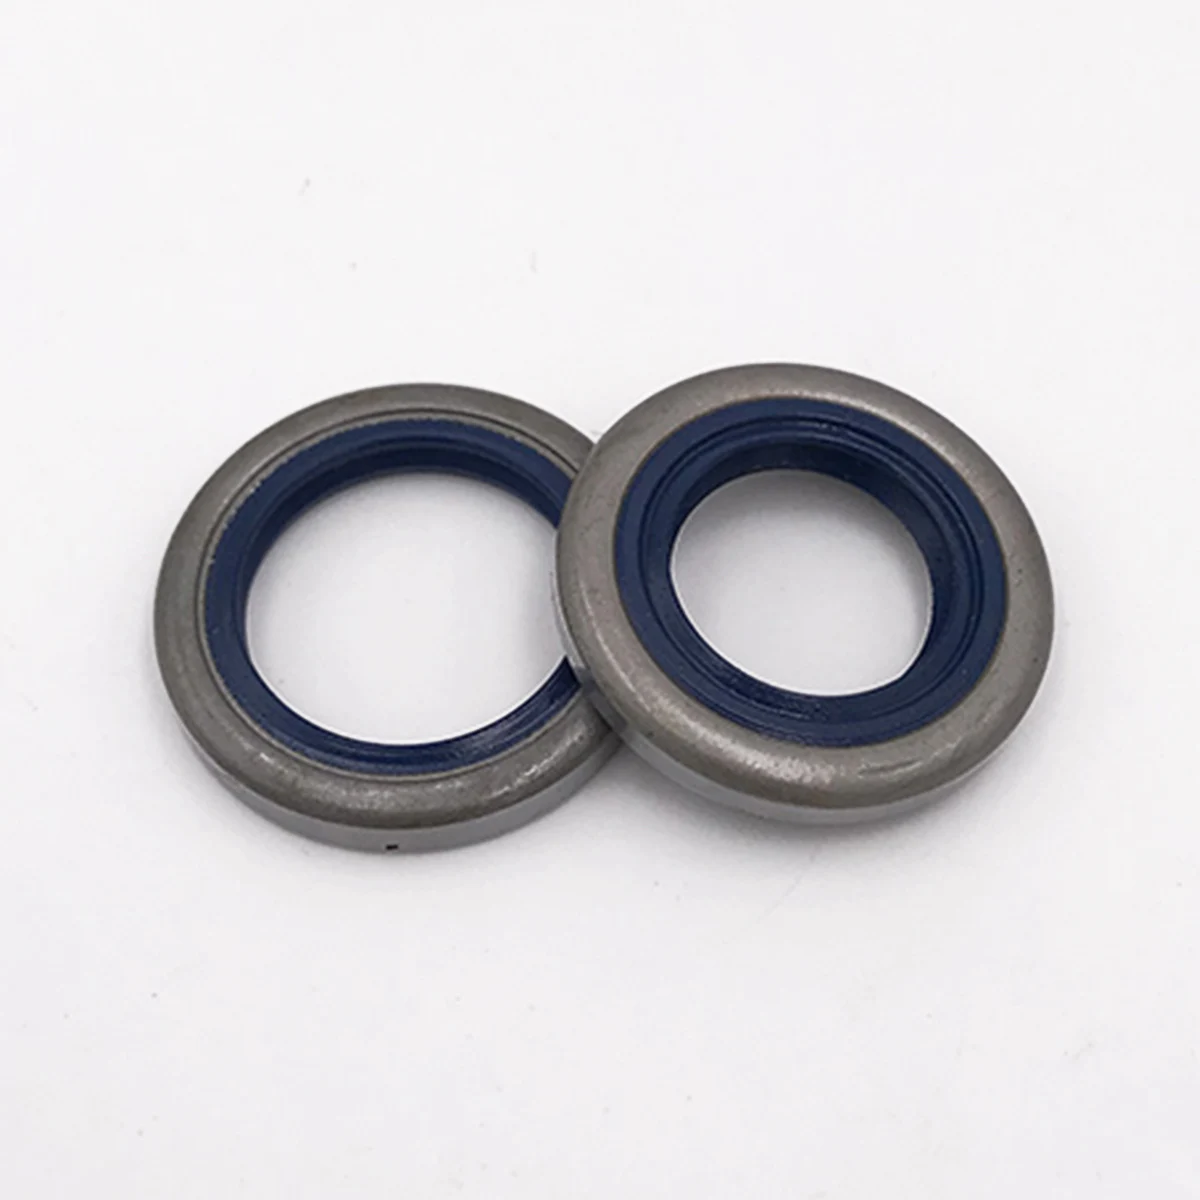 2pcs Oil Seals For Husqvarna 40 365 371 357 359 51 55 257 262 254 XP Replacement Oil Seals Chainsaw Parts